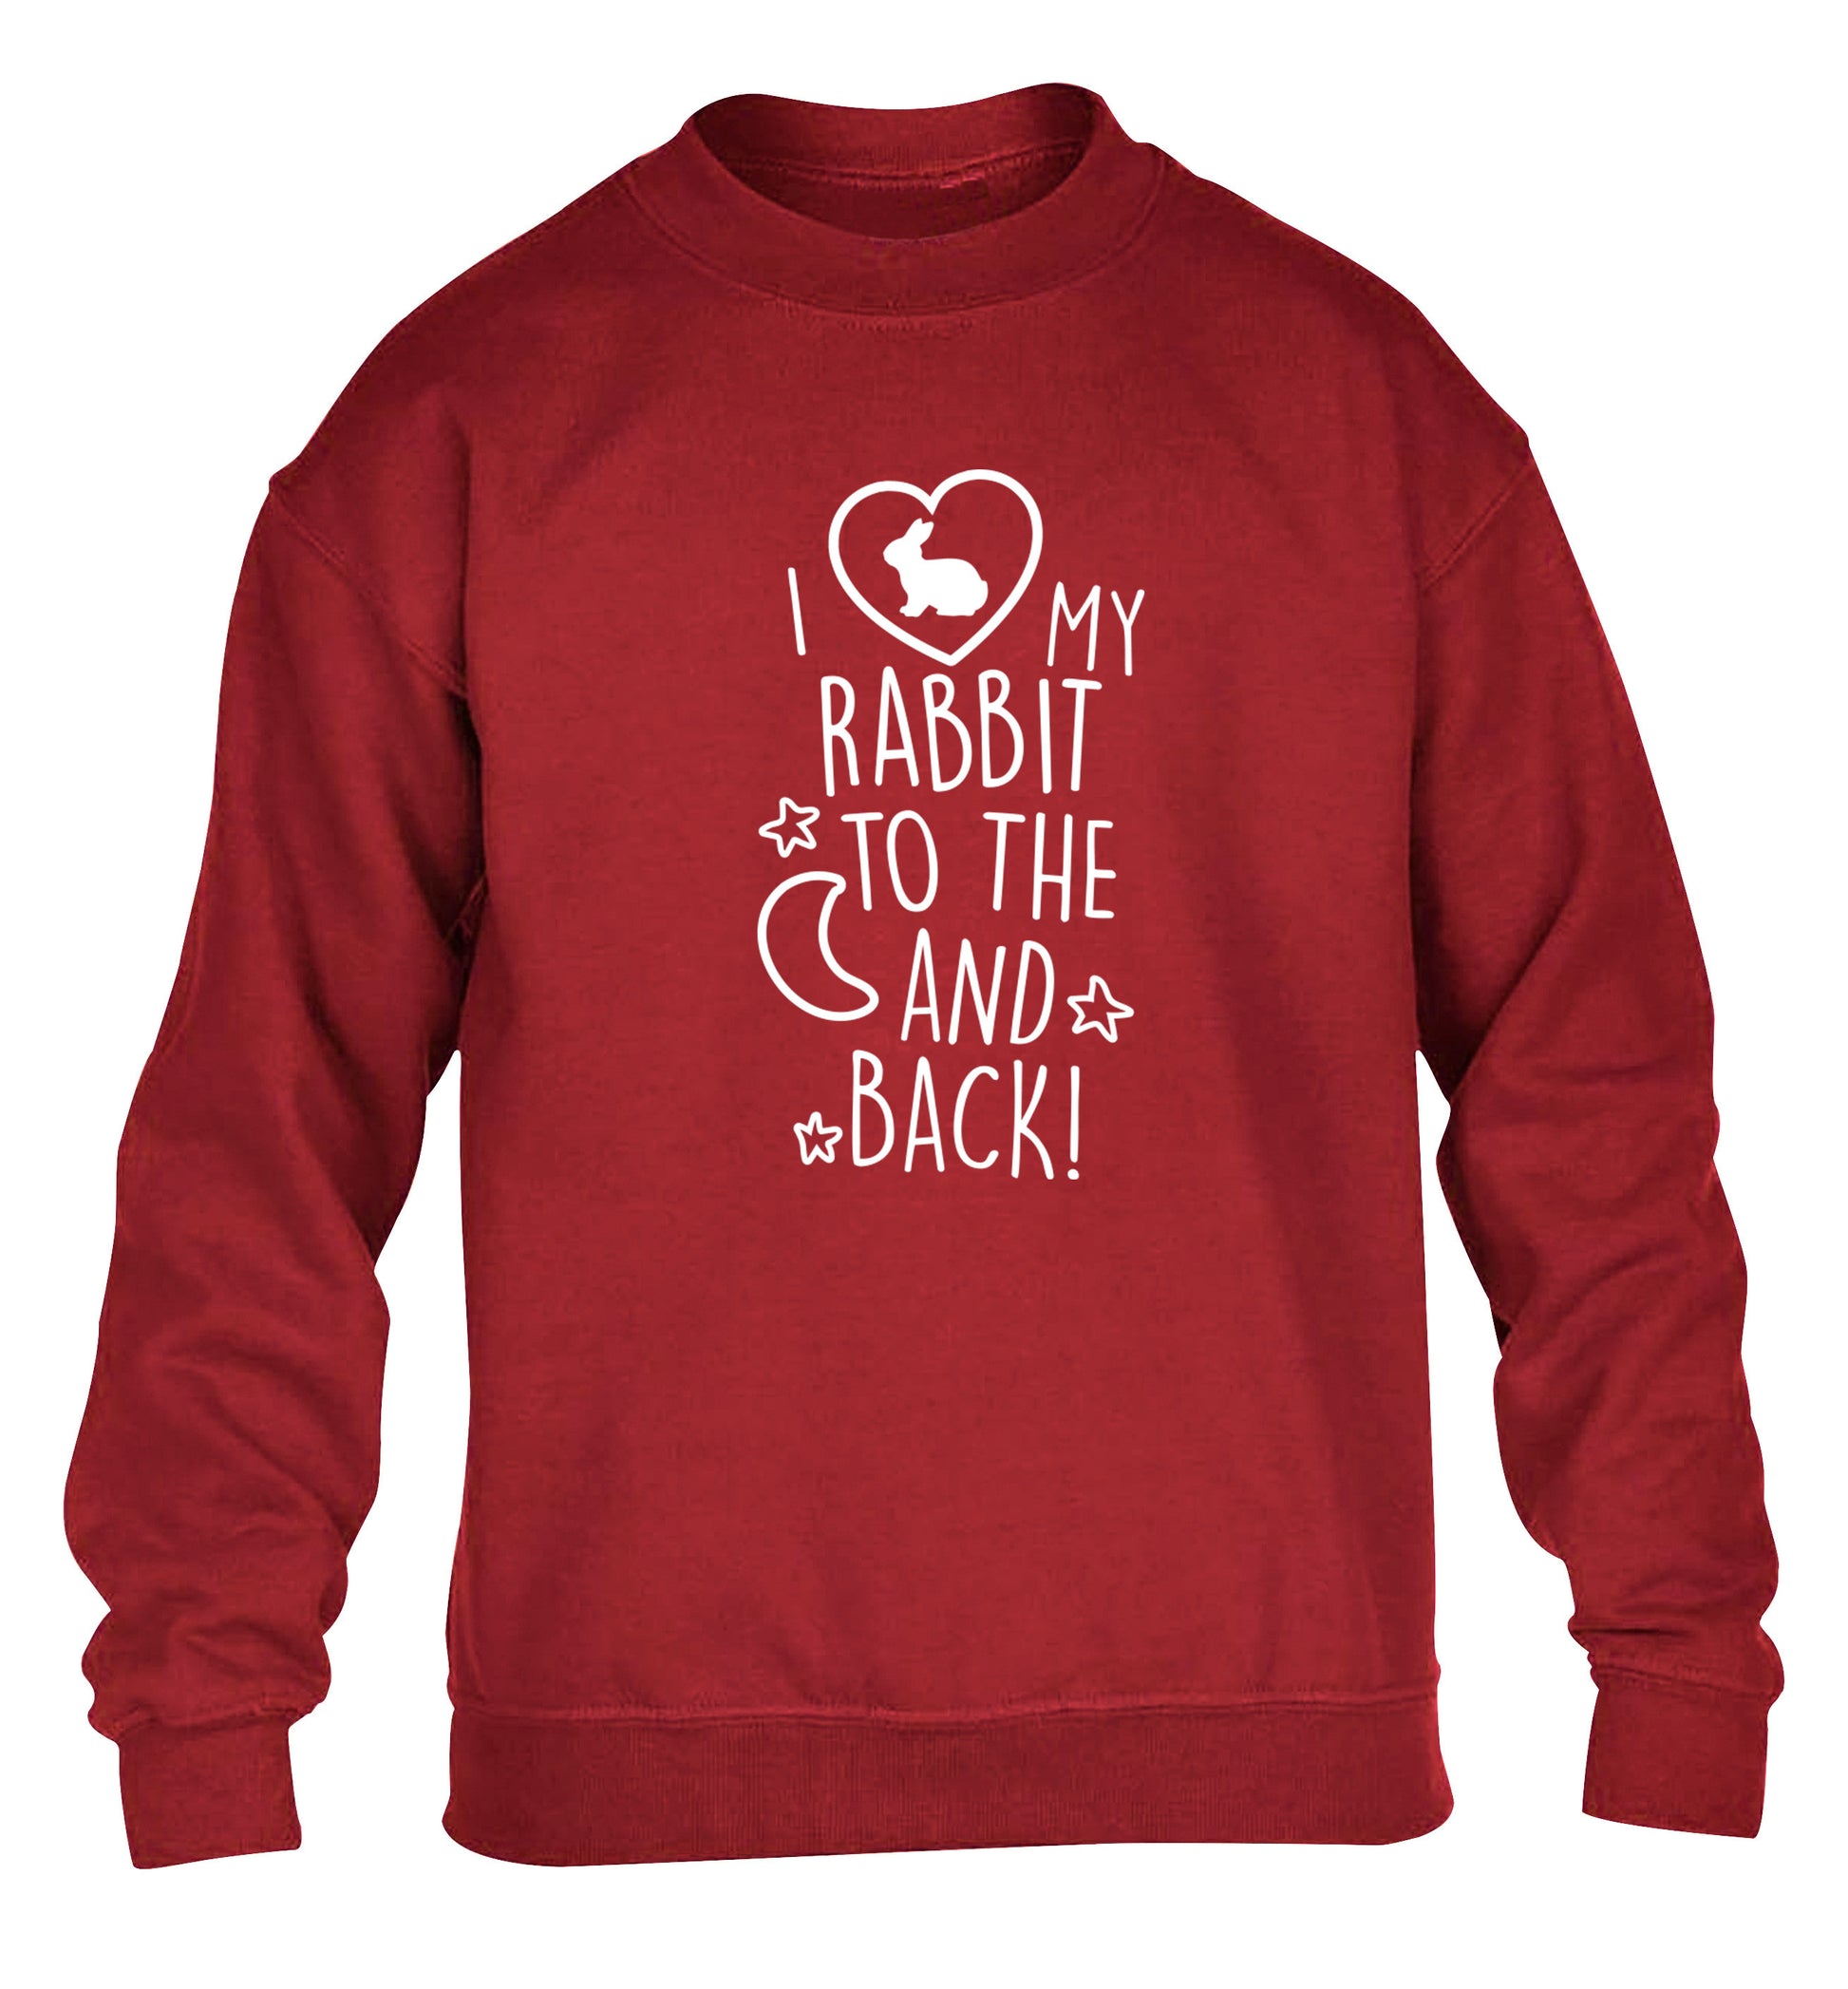 I love my rabbit to the moon and back children's grey  sweater 12-14 Years